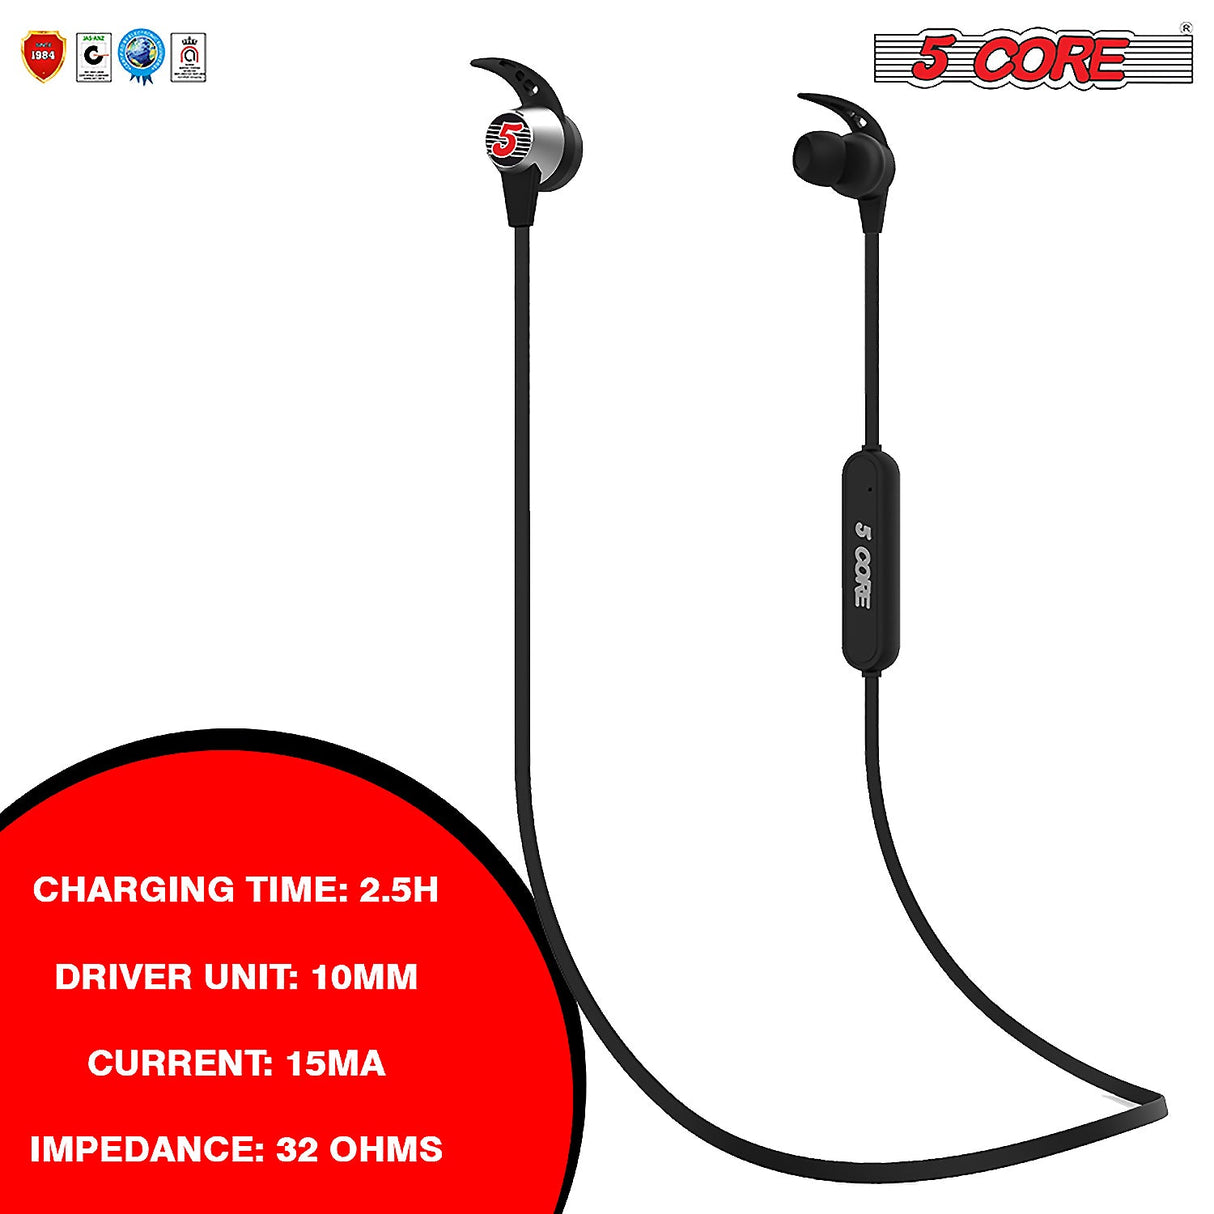 5 Core Bluetooth Headphone Black | Wireless Sports Earbuds with Mic| Stereo Sweatproof in-Ear Earphones| Noise Cancelling Headsets for Gym, Running, Workout, 12 Hours Playtime - EP02 B